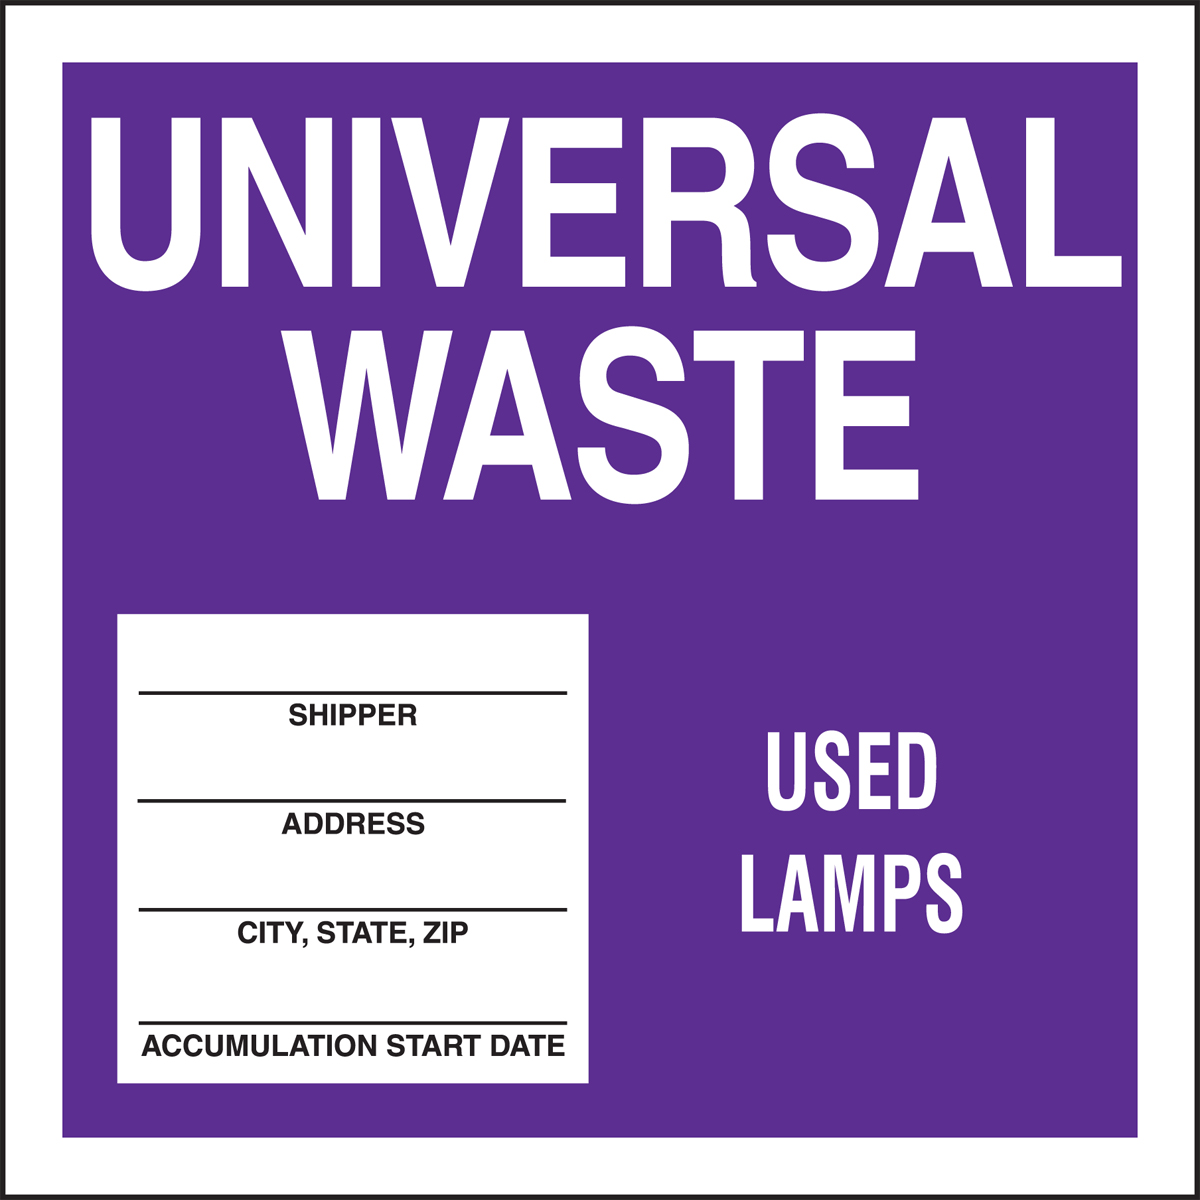 Drum & Container Labels: Universal Waste - Used Lamps (MHZW515PSP)